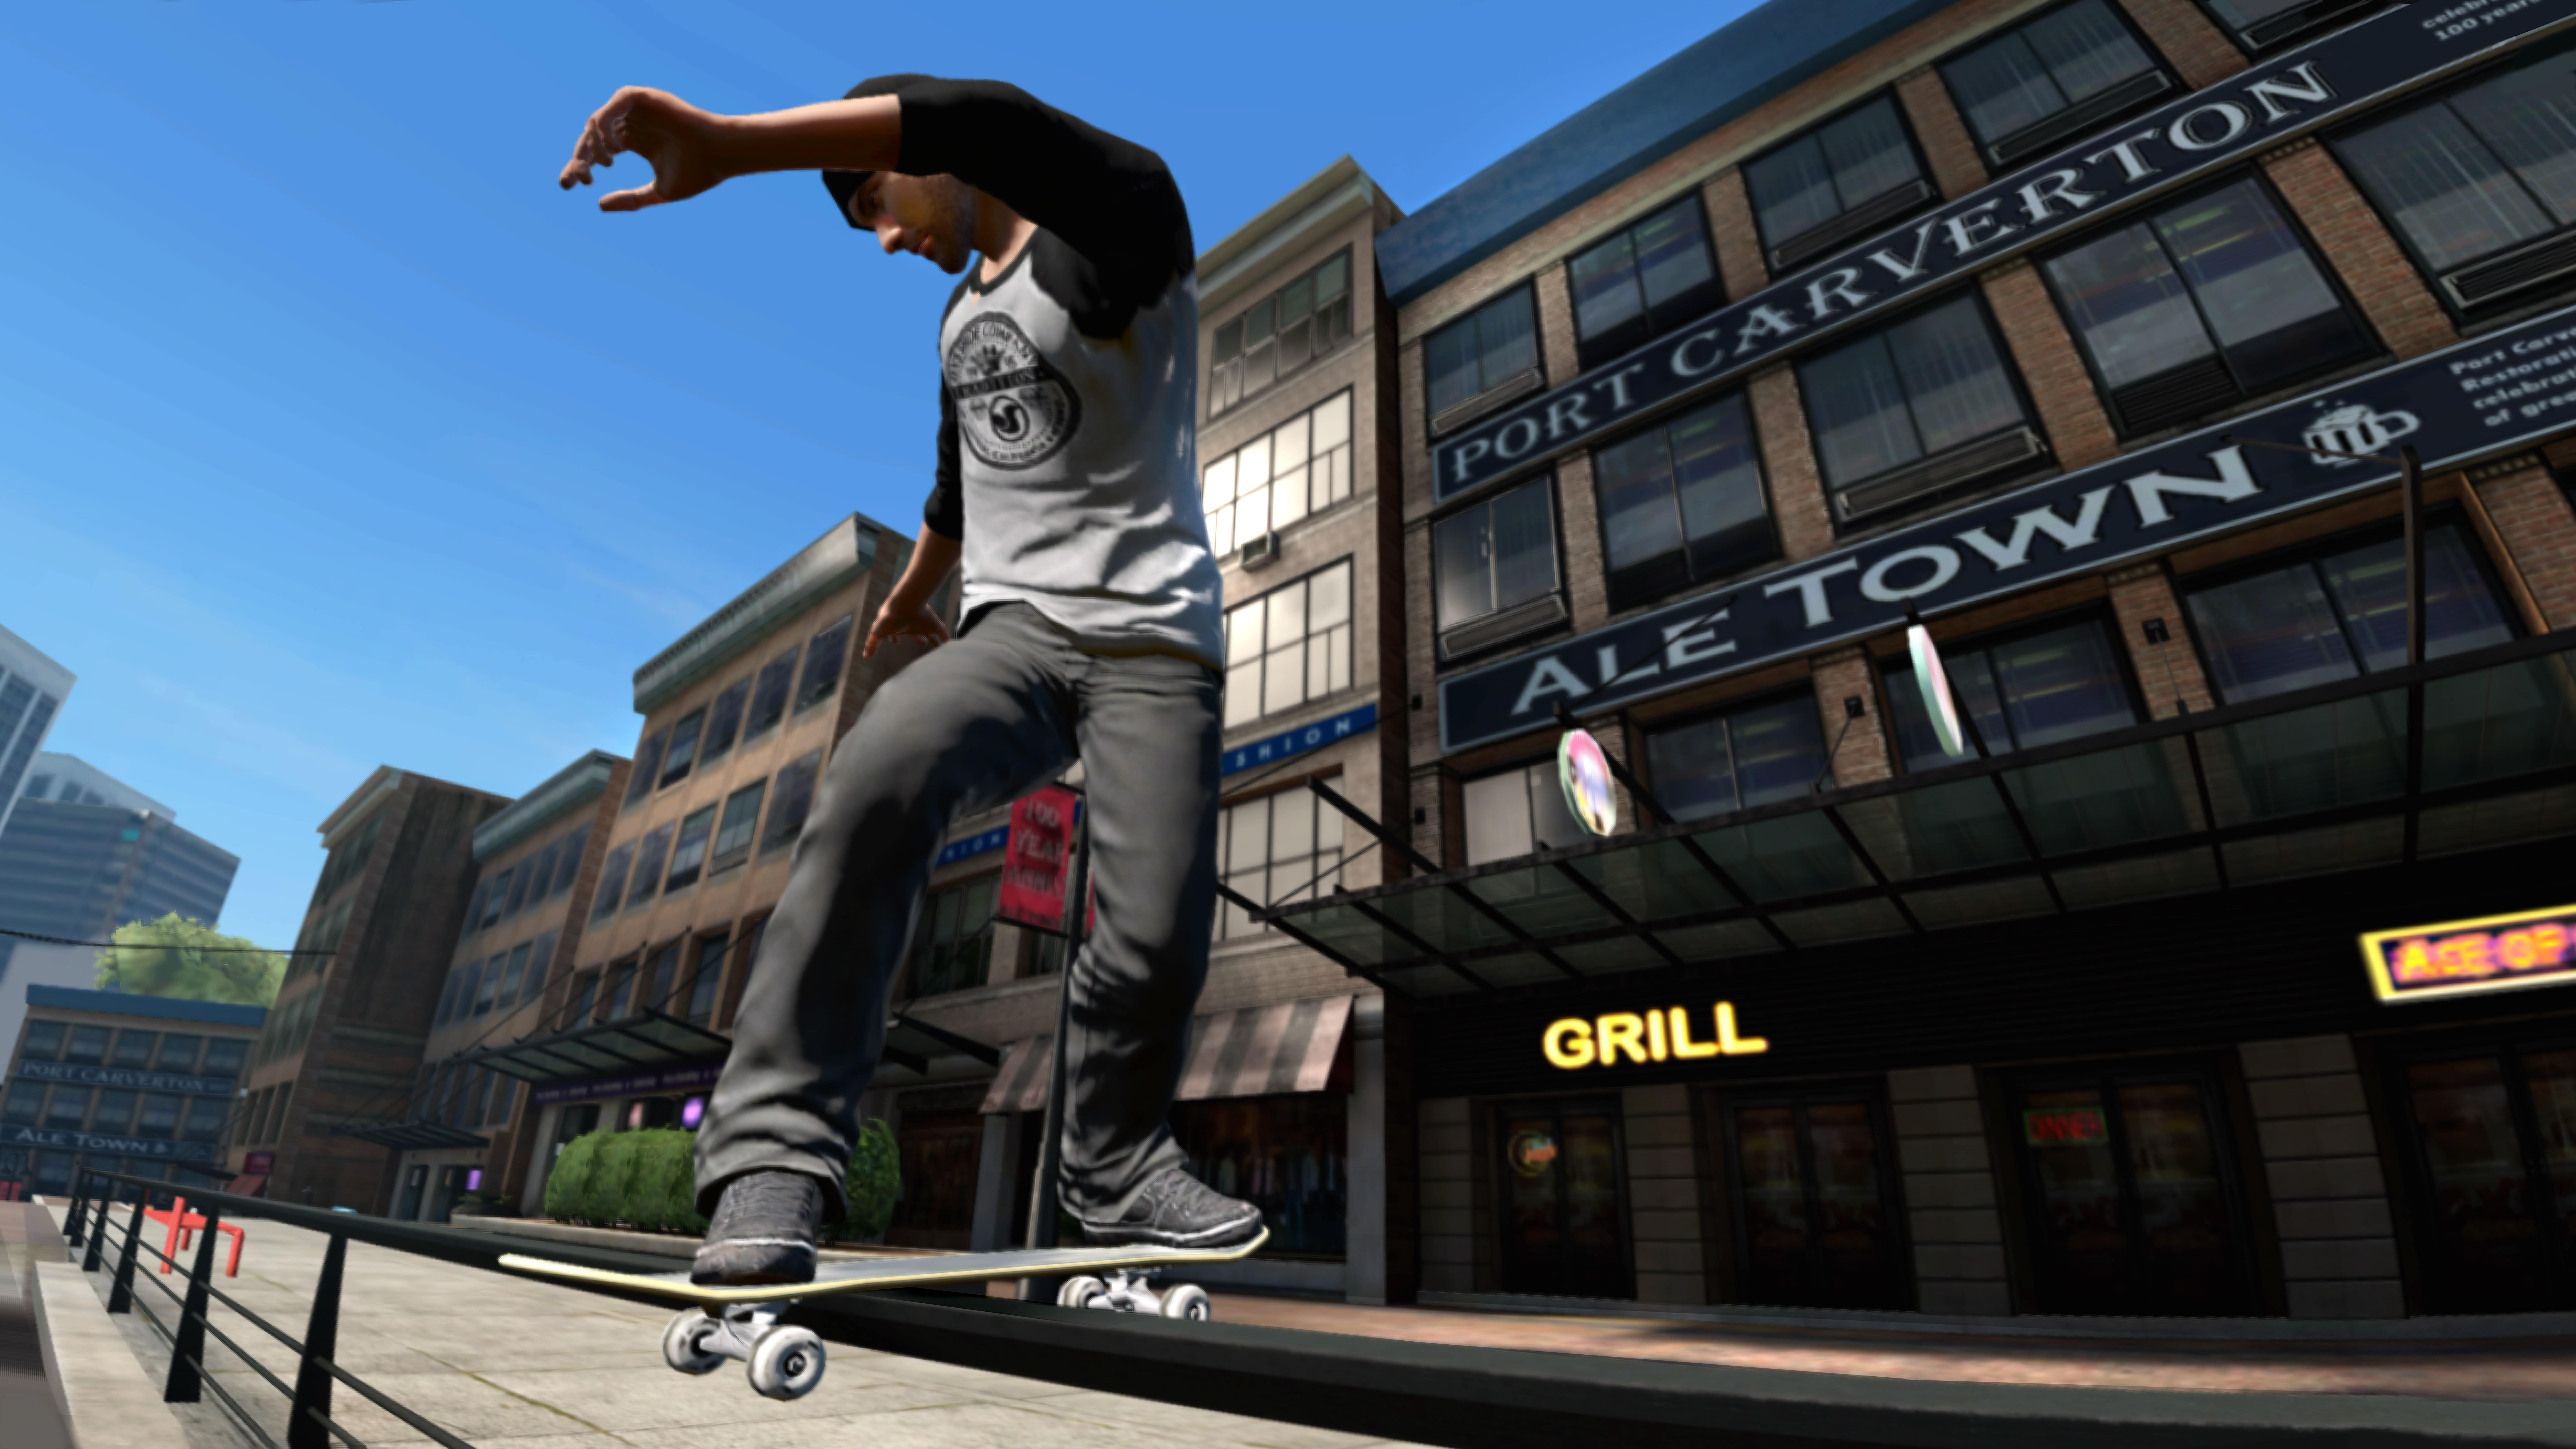 skate 3 xbox one review